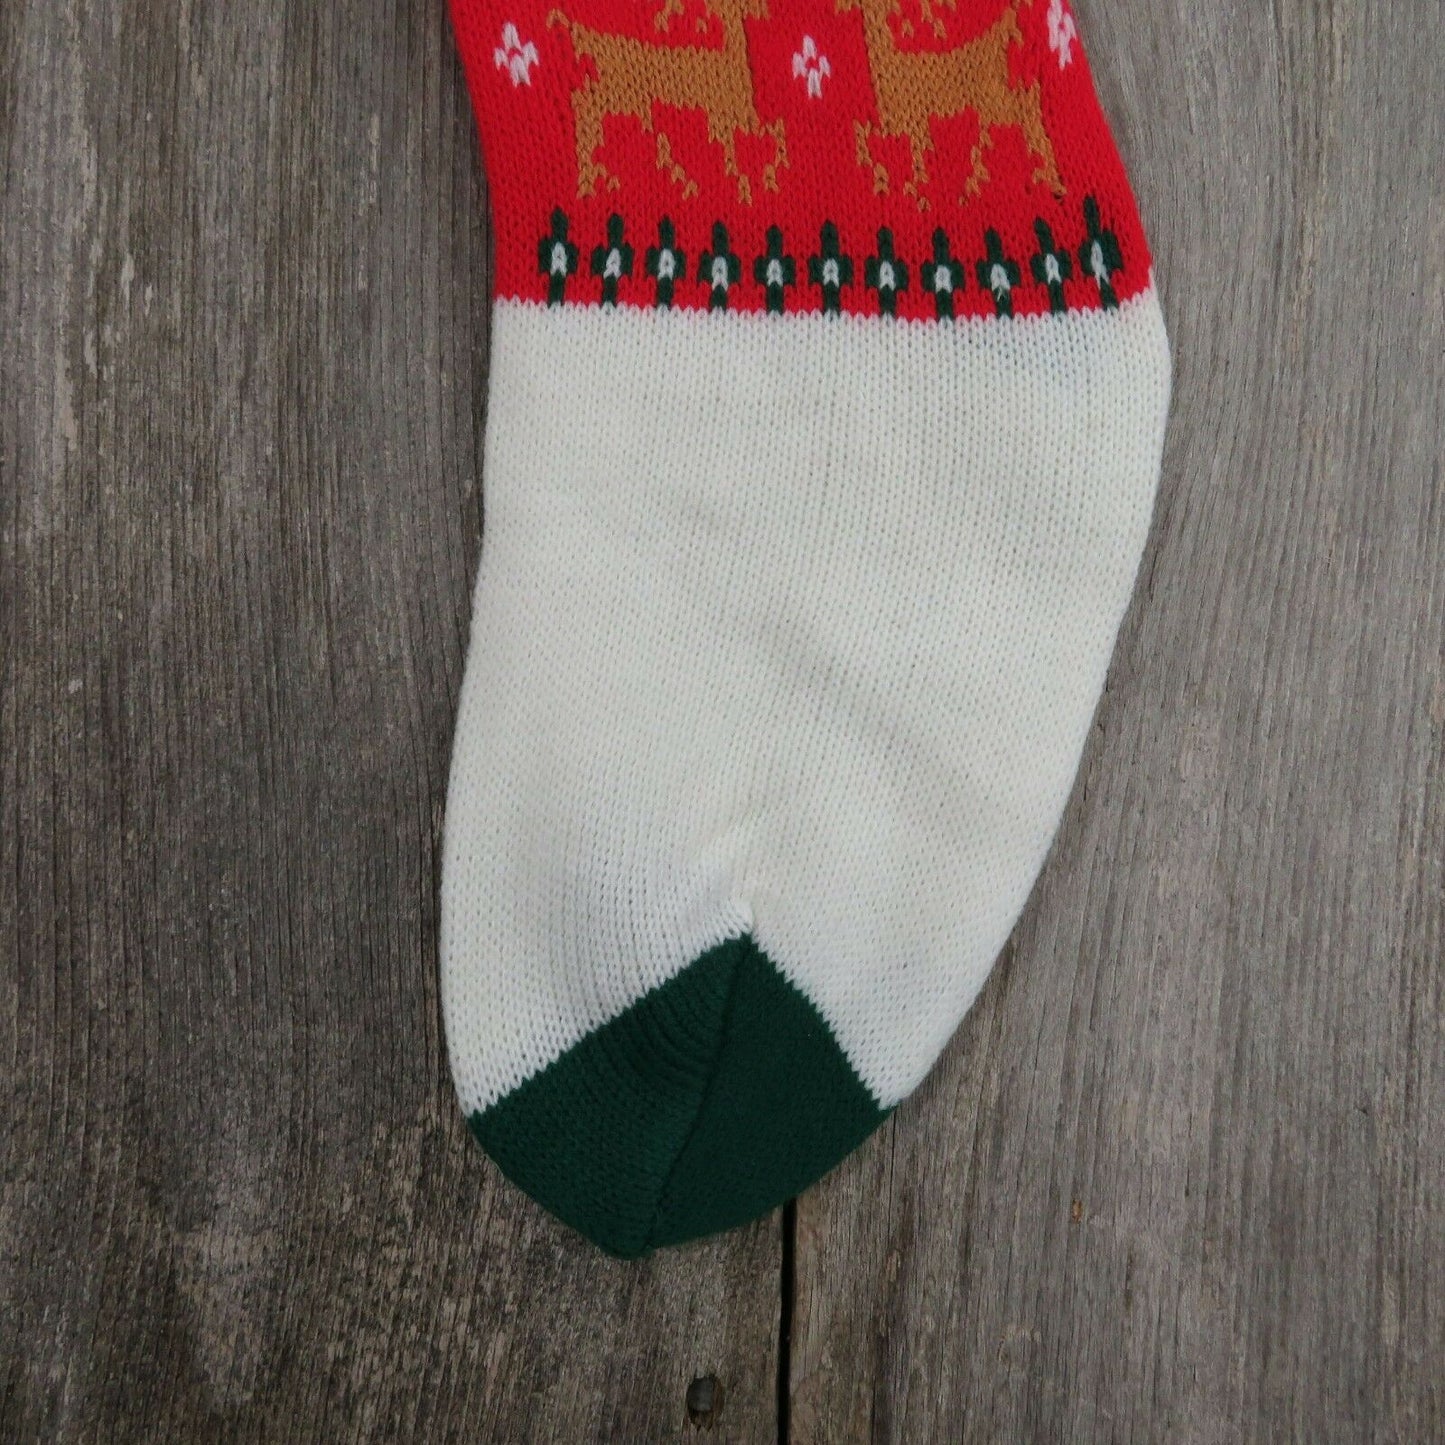 Vintage Stocking Knitted Knit Night Before Christmas Tree Reindeer Red White - At Grandma's Table